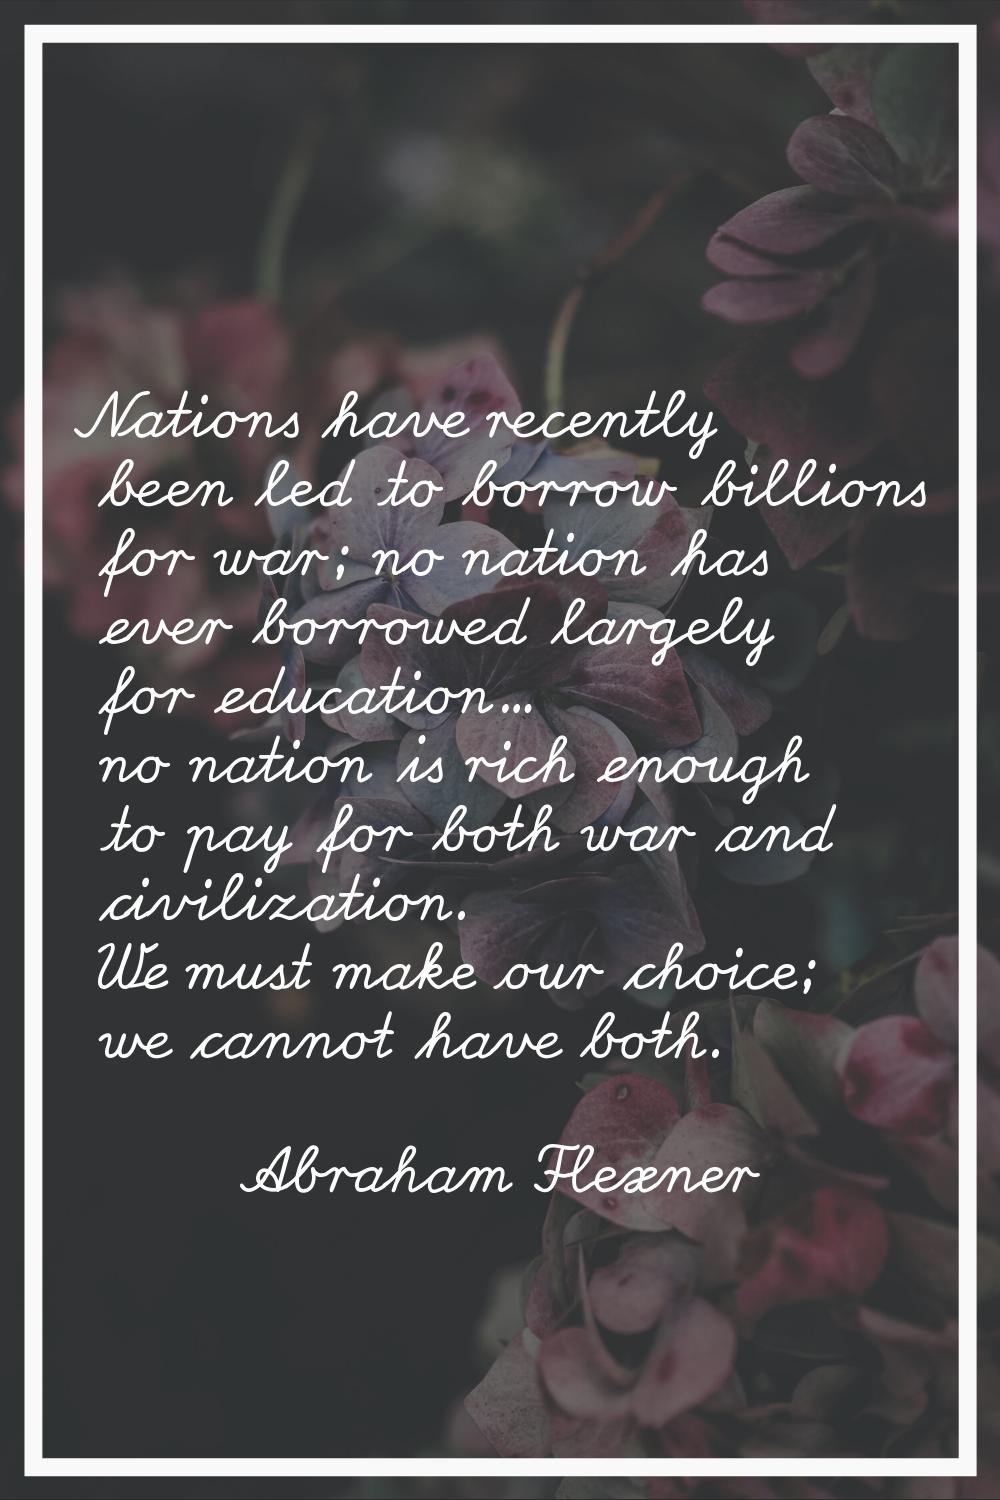 Nations have recently been led to borrow billions for war; no nation has ever borrowed largely for 